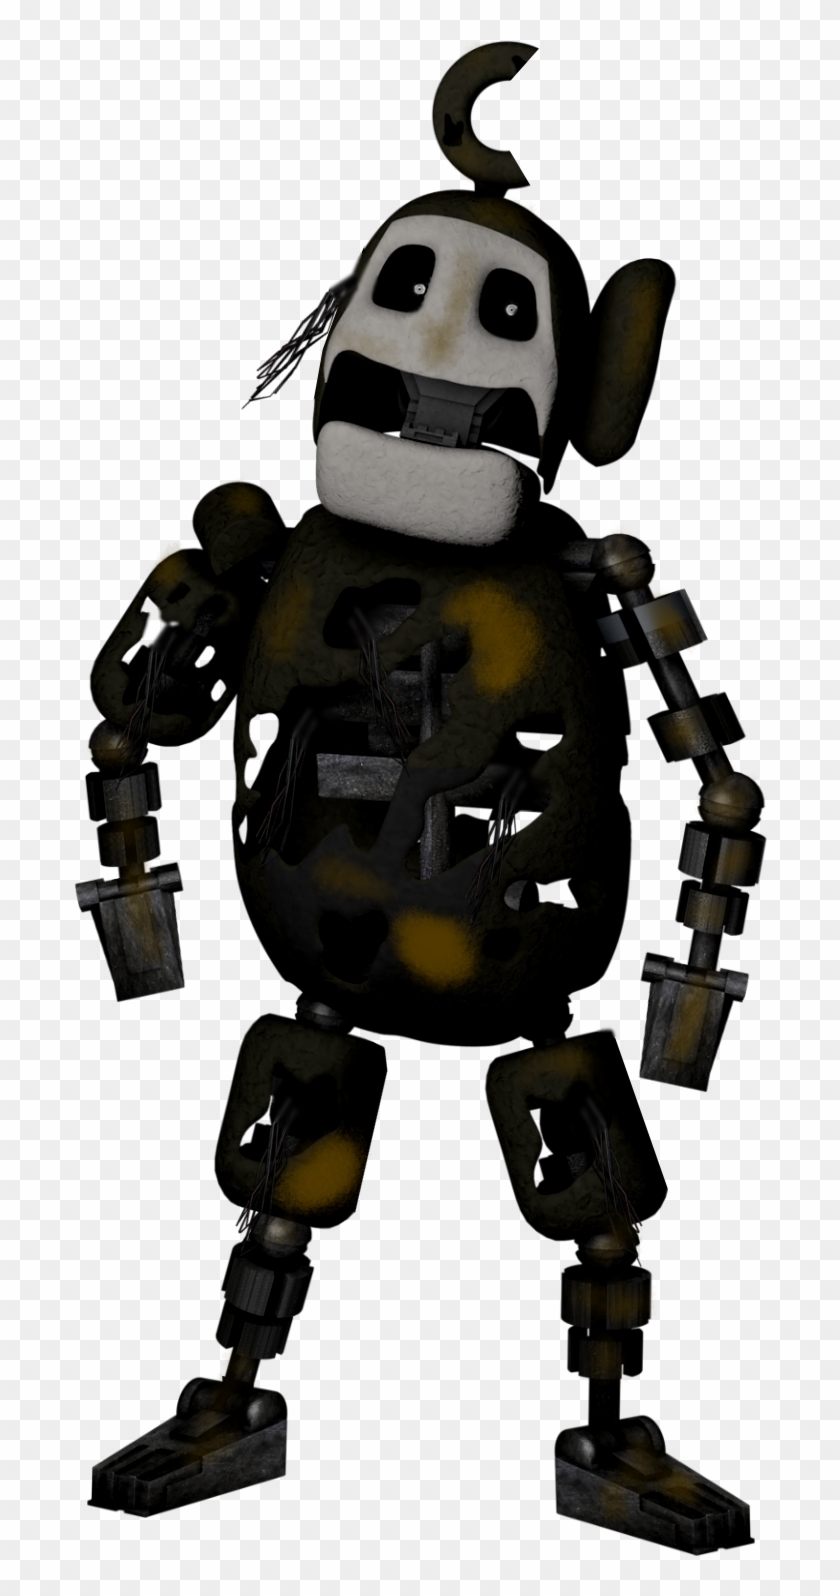 He Is Missing His Right Ear And He Has Endoskeleton - Five Nights At Tubbyland 3 Po #577083